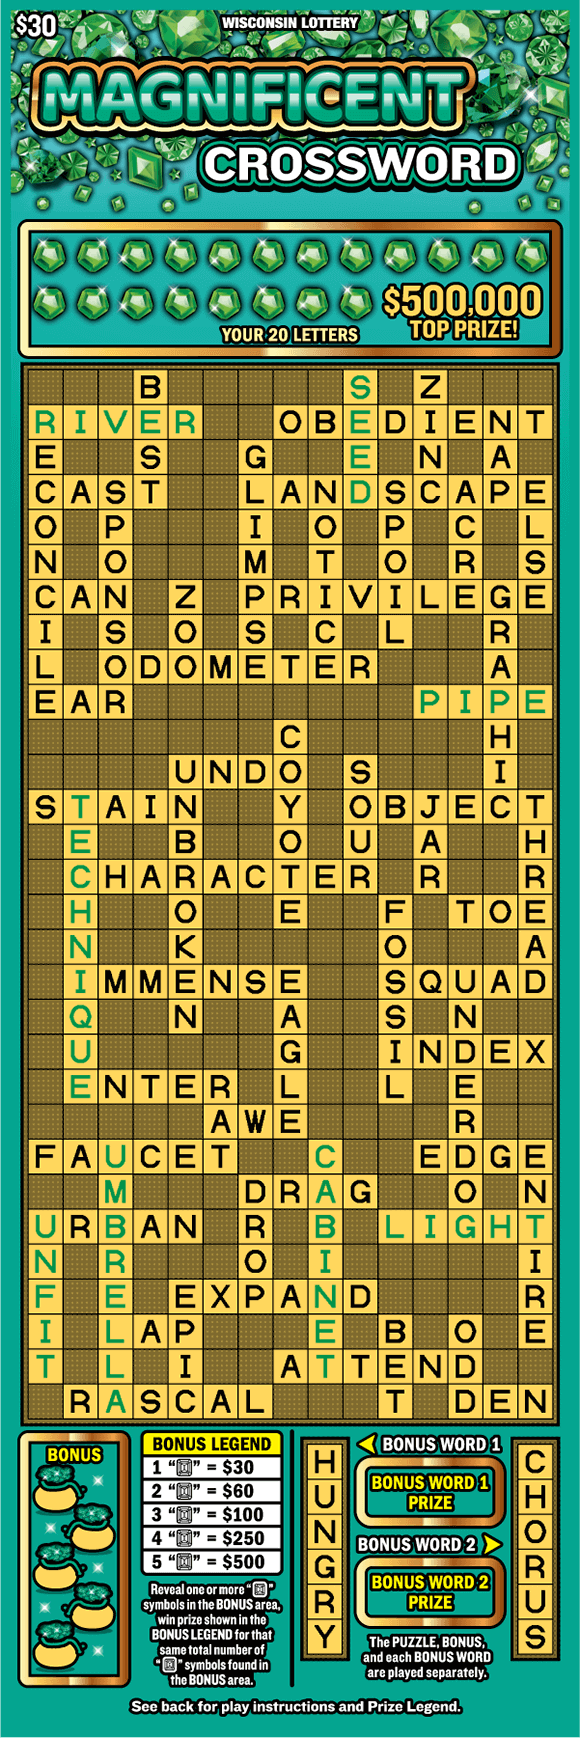 assortment of green jewels on teal background with tall yellow crossword puzzle and icons of golden pots filled with green gems on scratch ticket